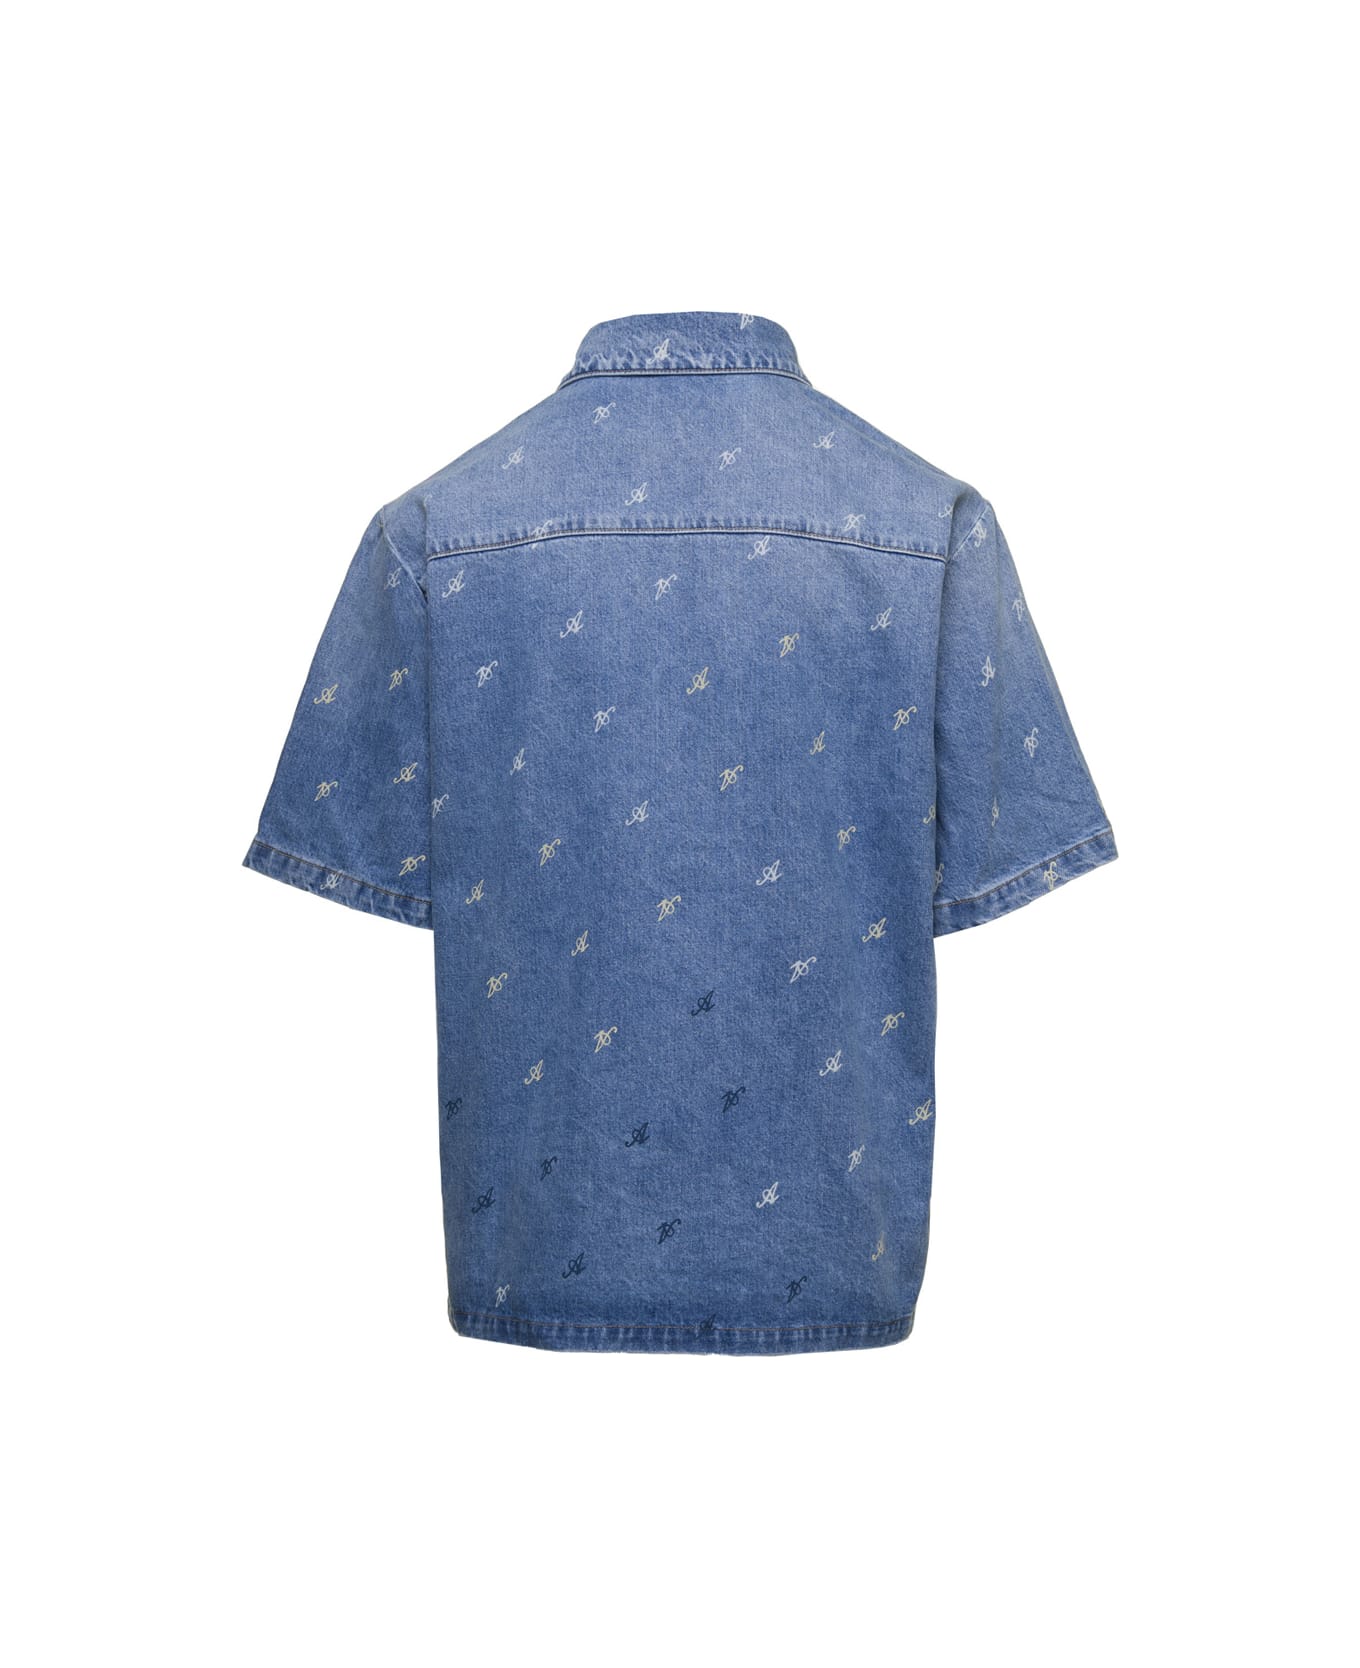 Axel Arigato Blue Jeans Shirt With Logo All Over In Denim Man - Blu